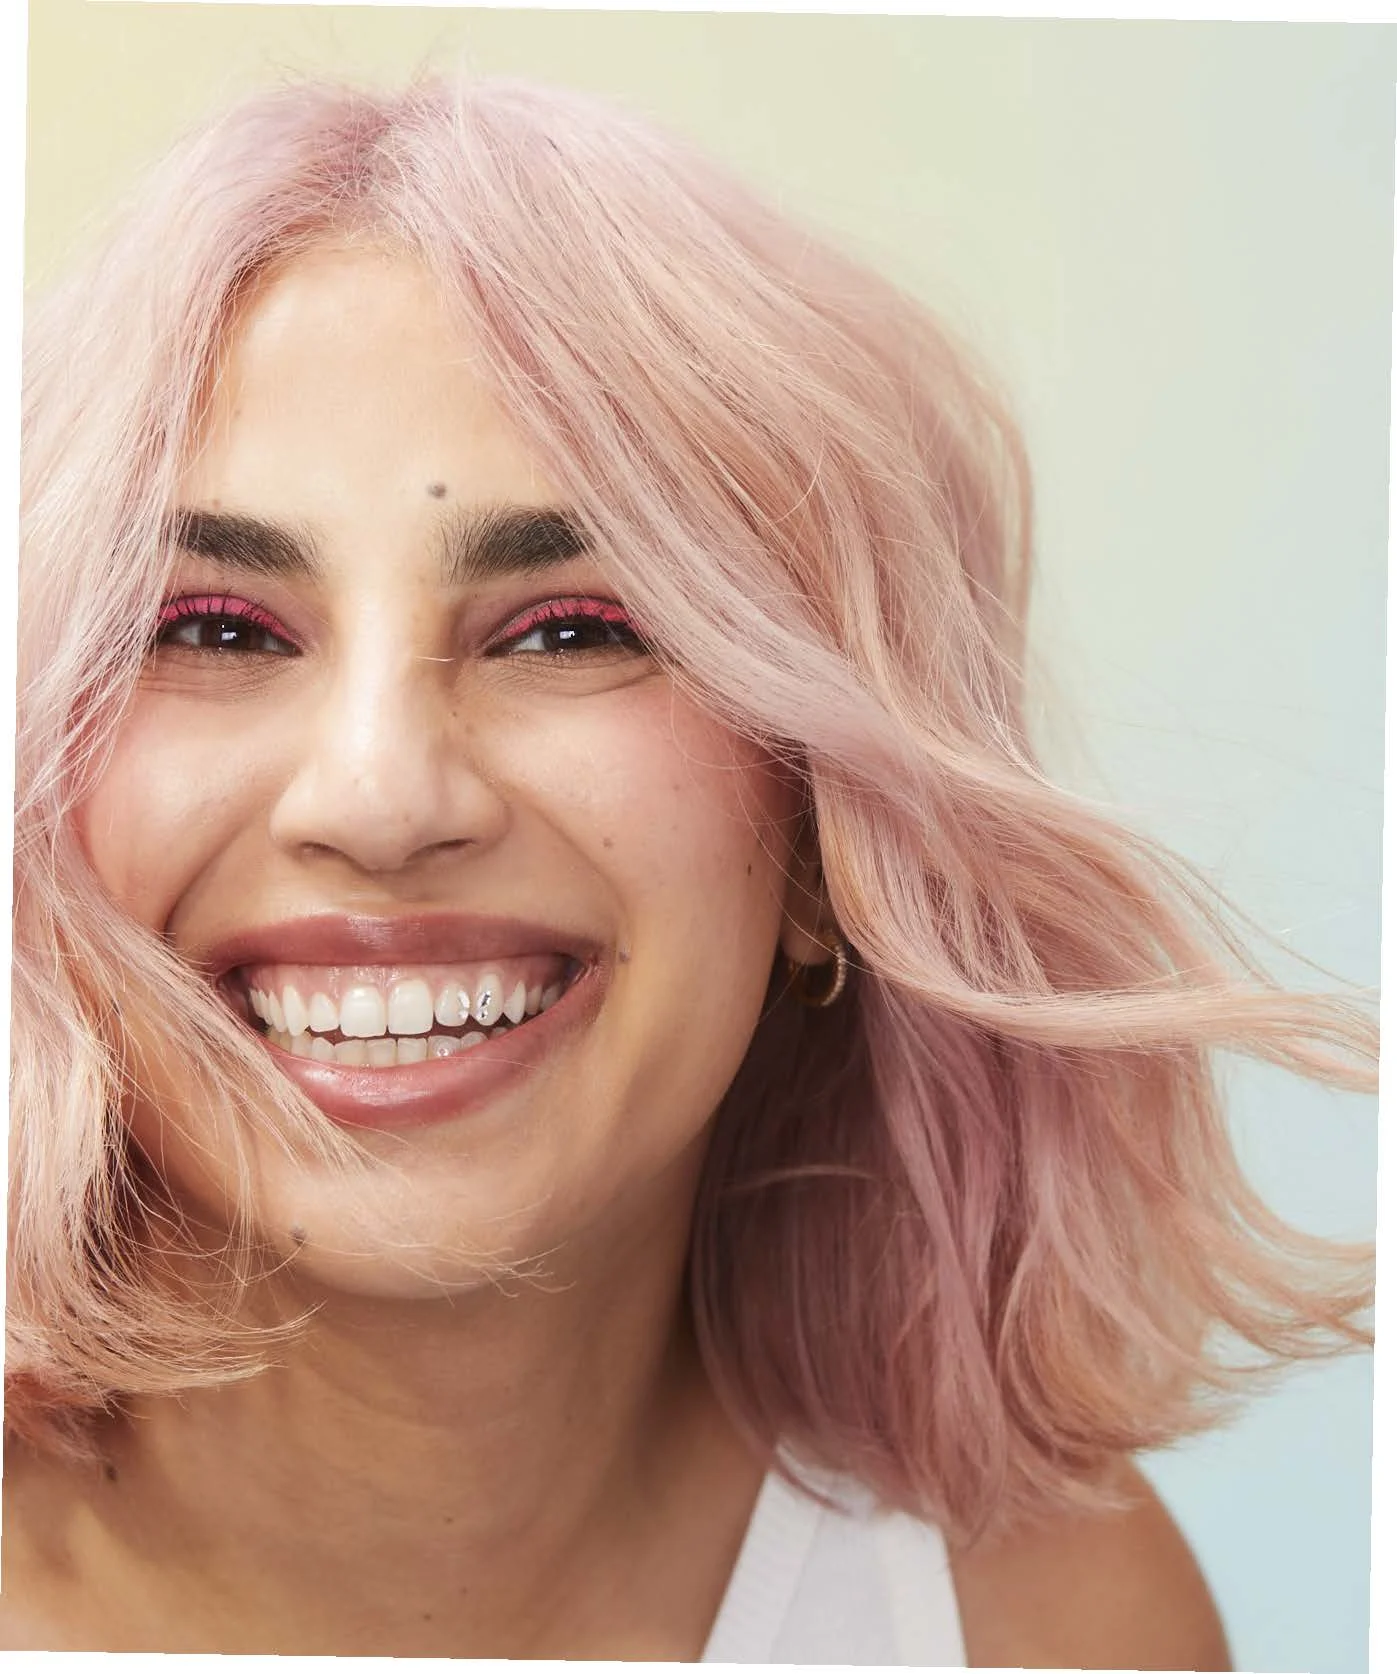 Here's how you can fix brassy looking hair after bleaching